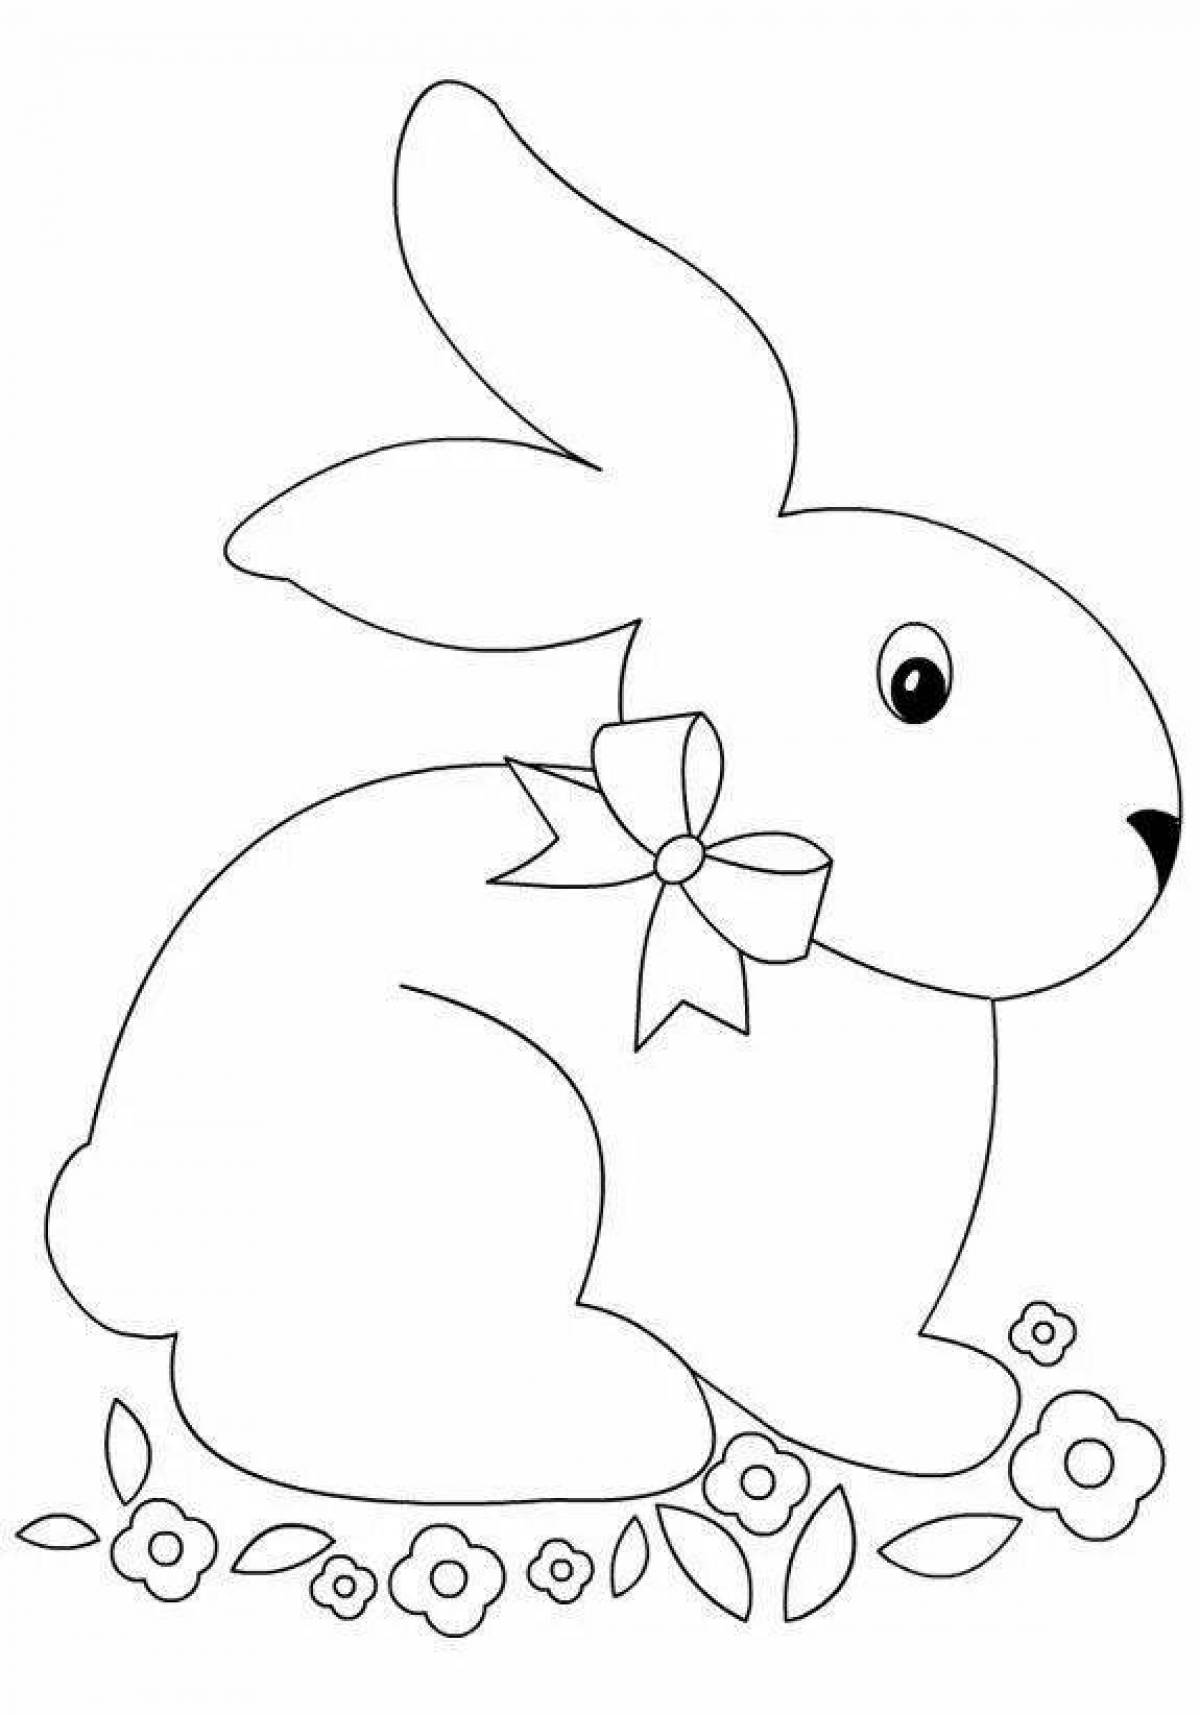 Coloring beckoning hare